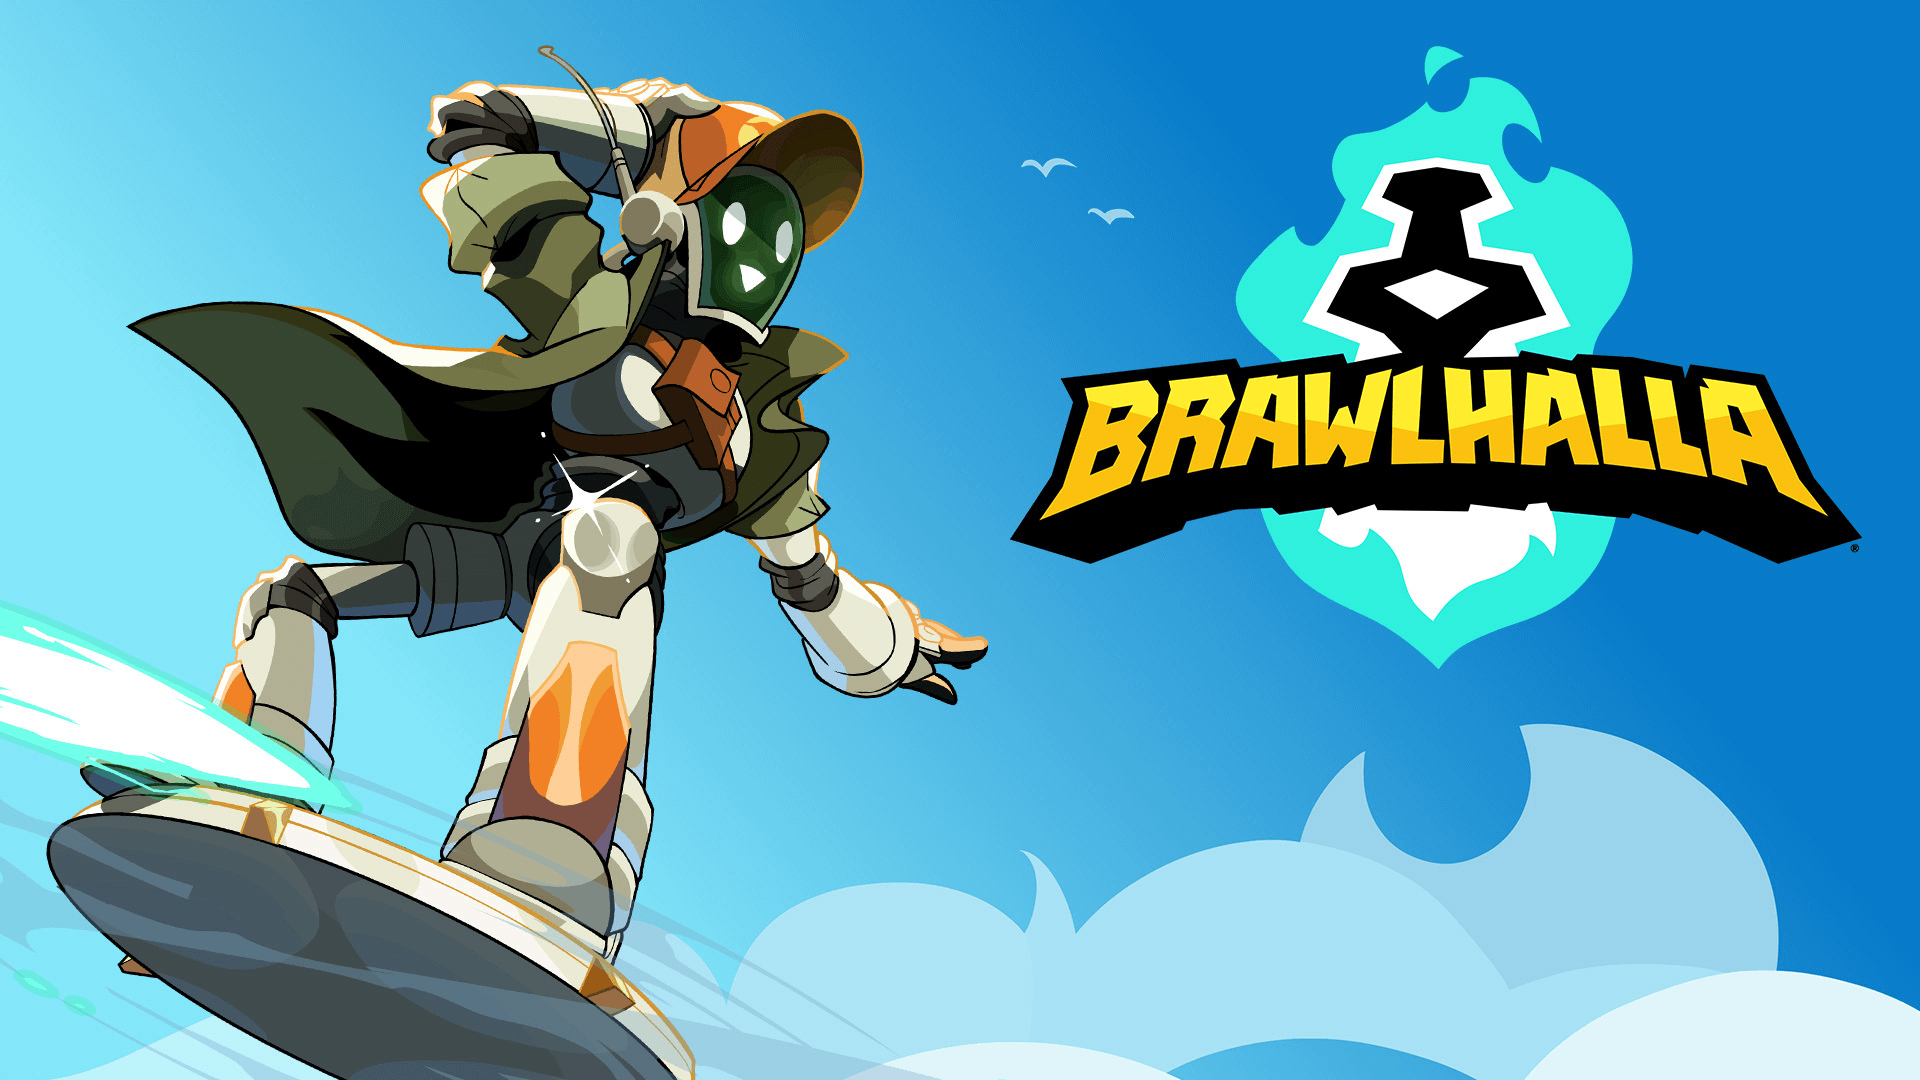 Seven the Engineer: A New Legend Joins Brawlhalla